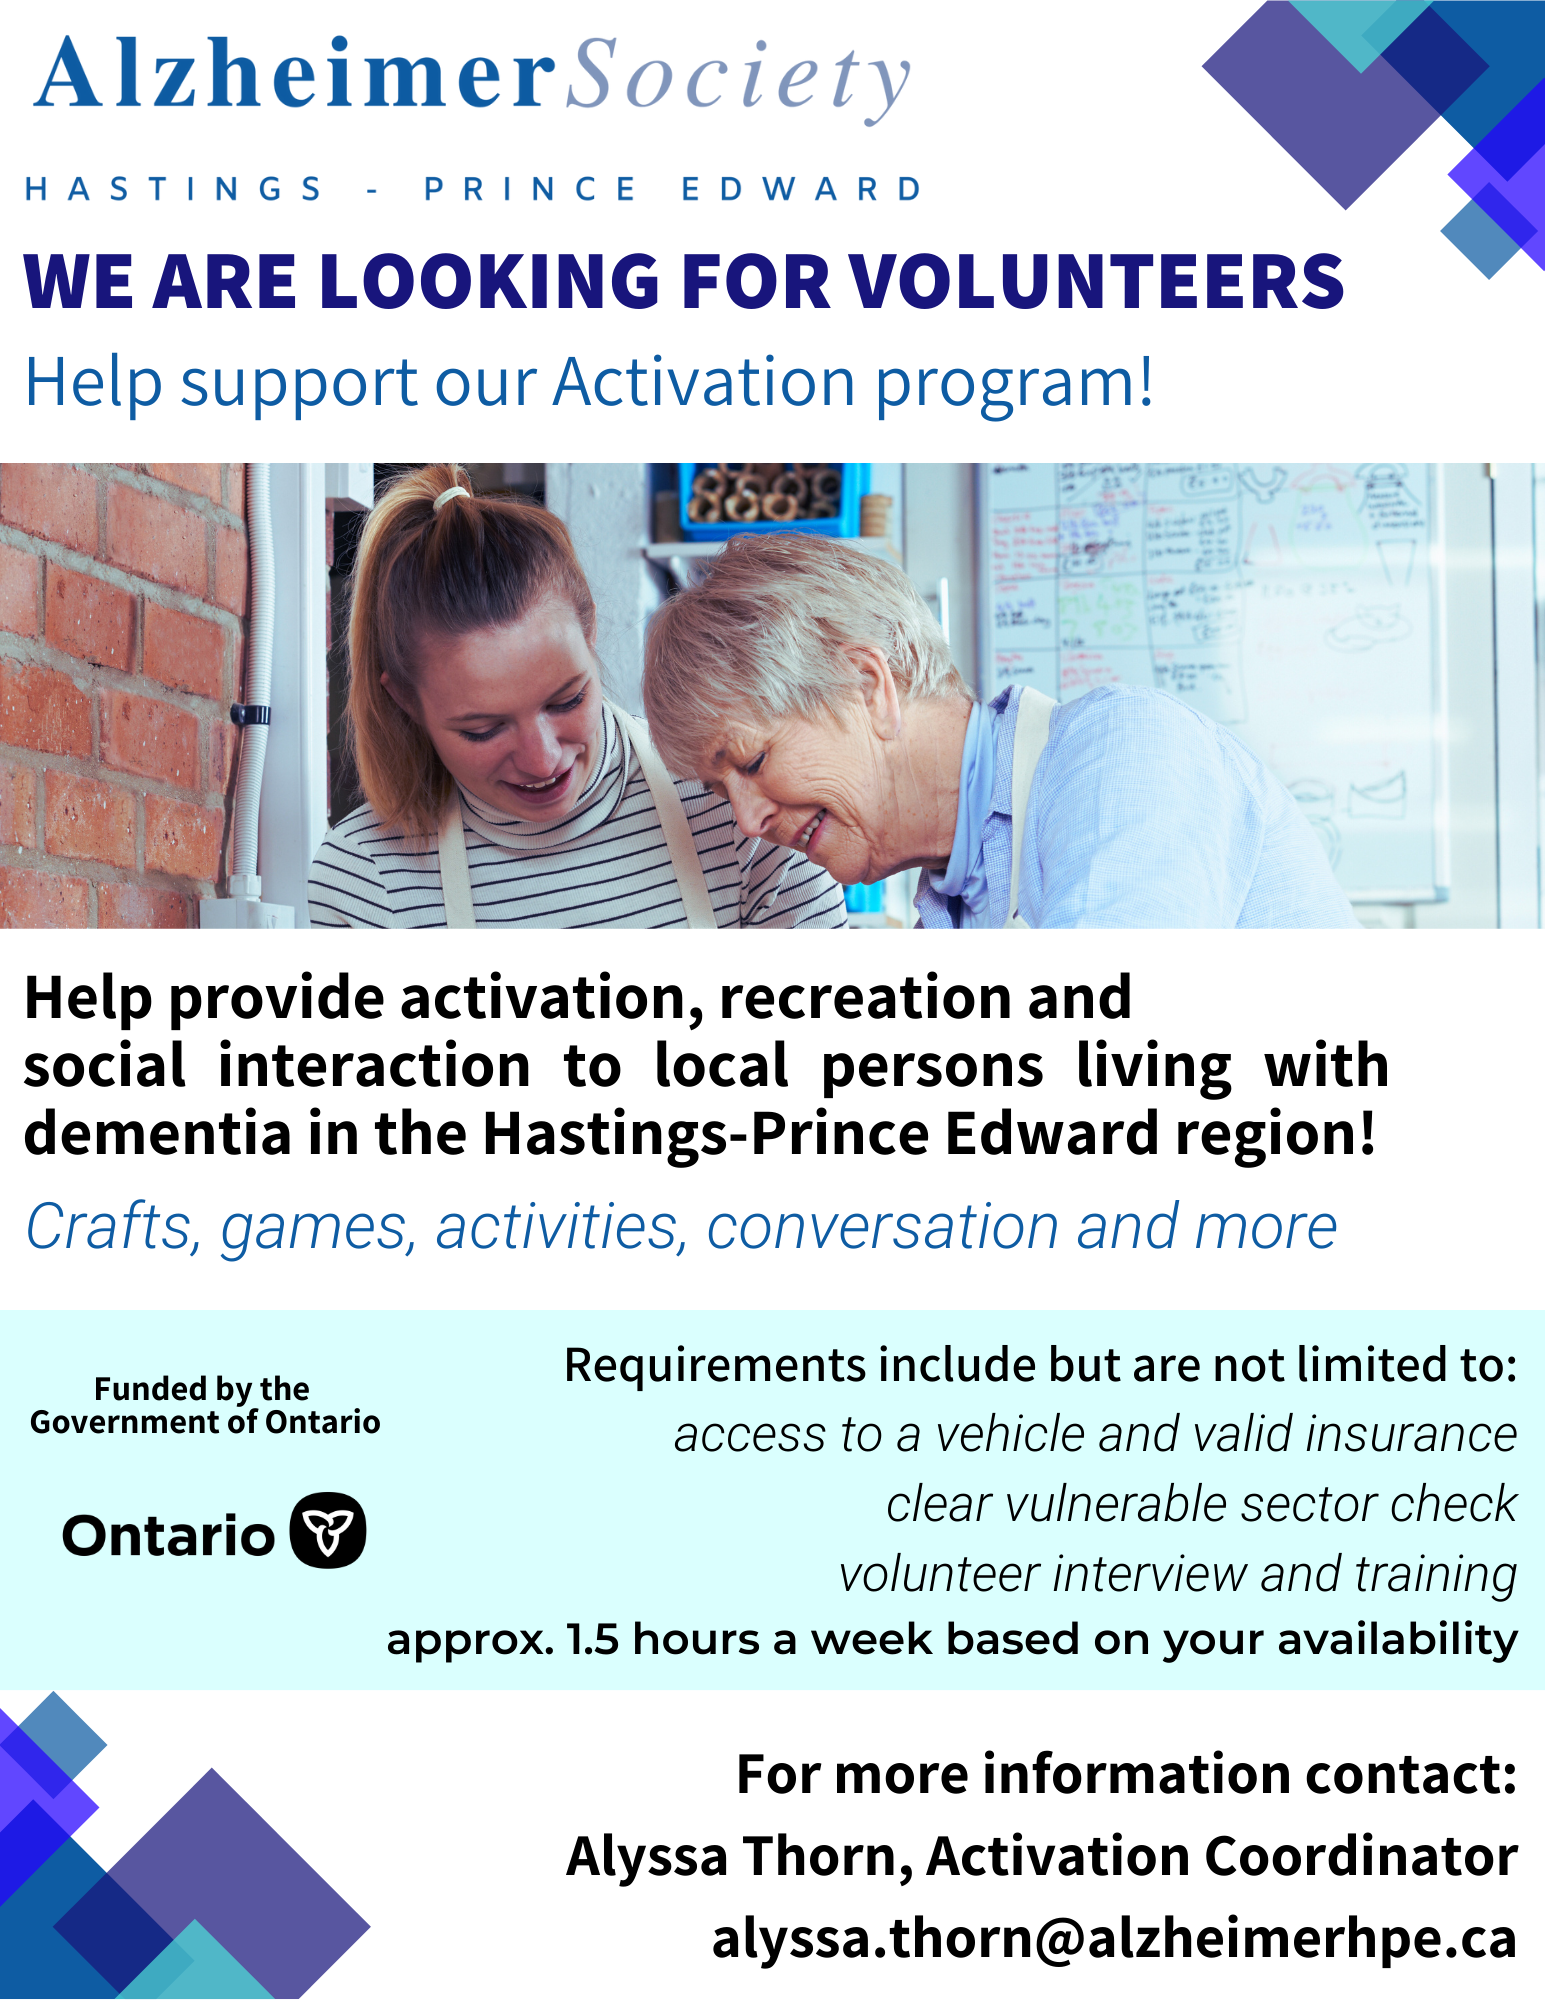 we are looking for volunteers for our in-home activations program